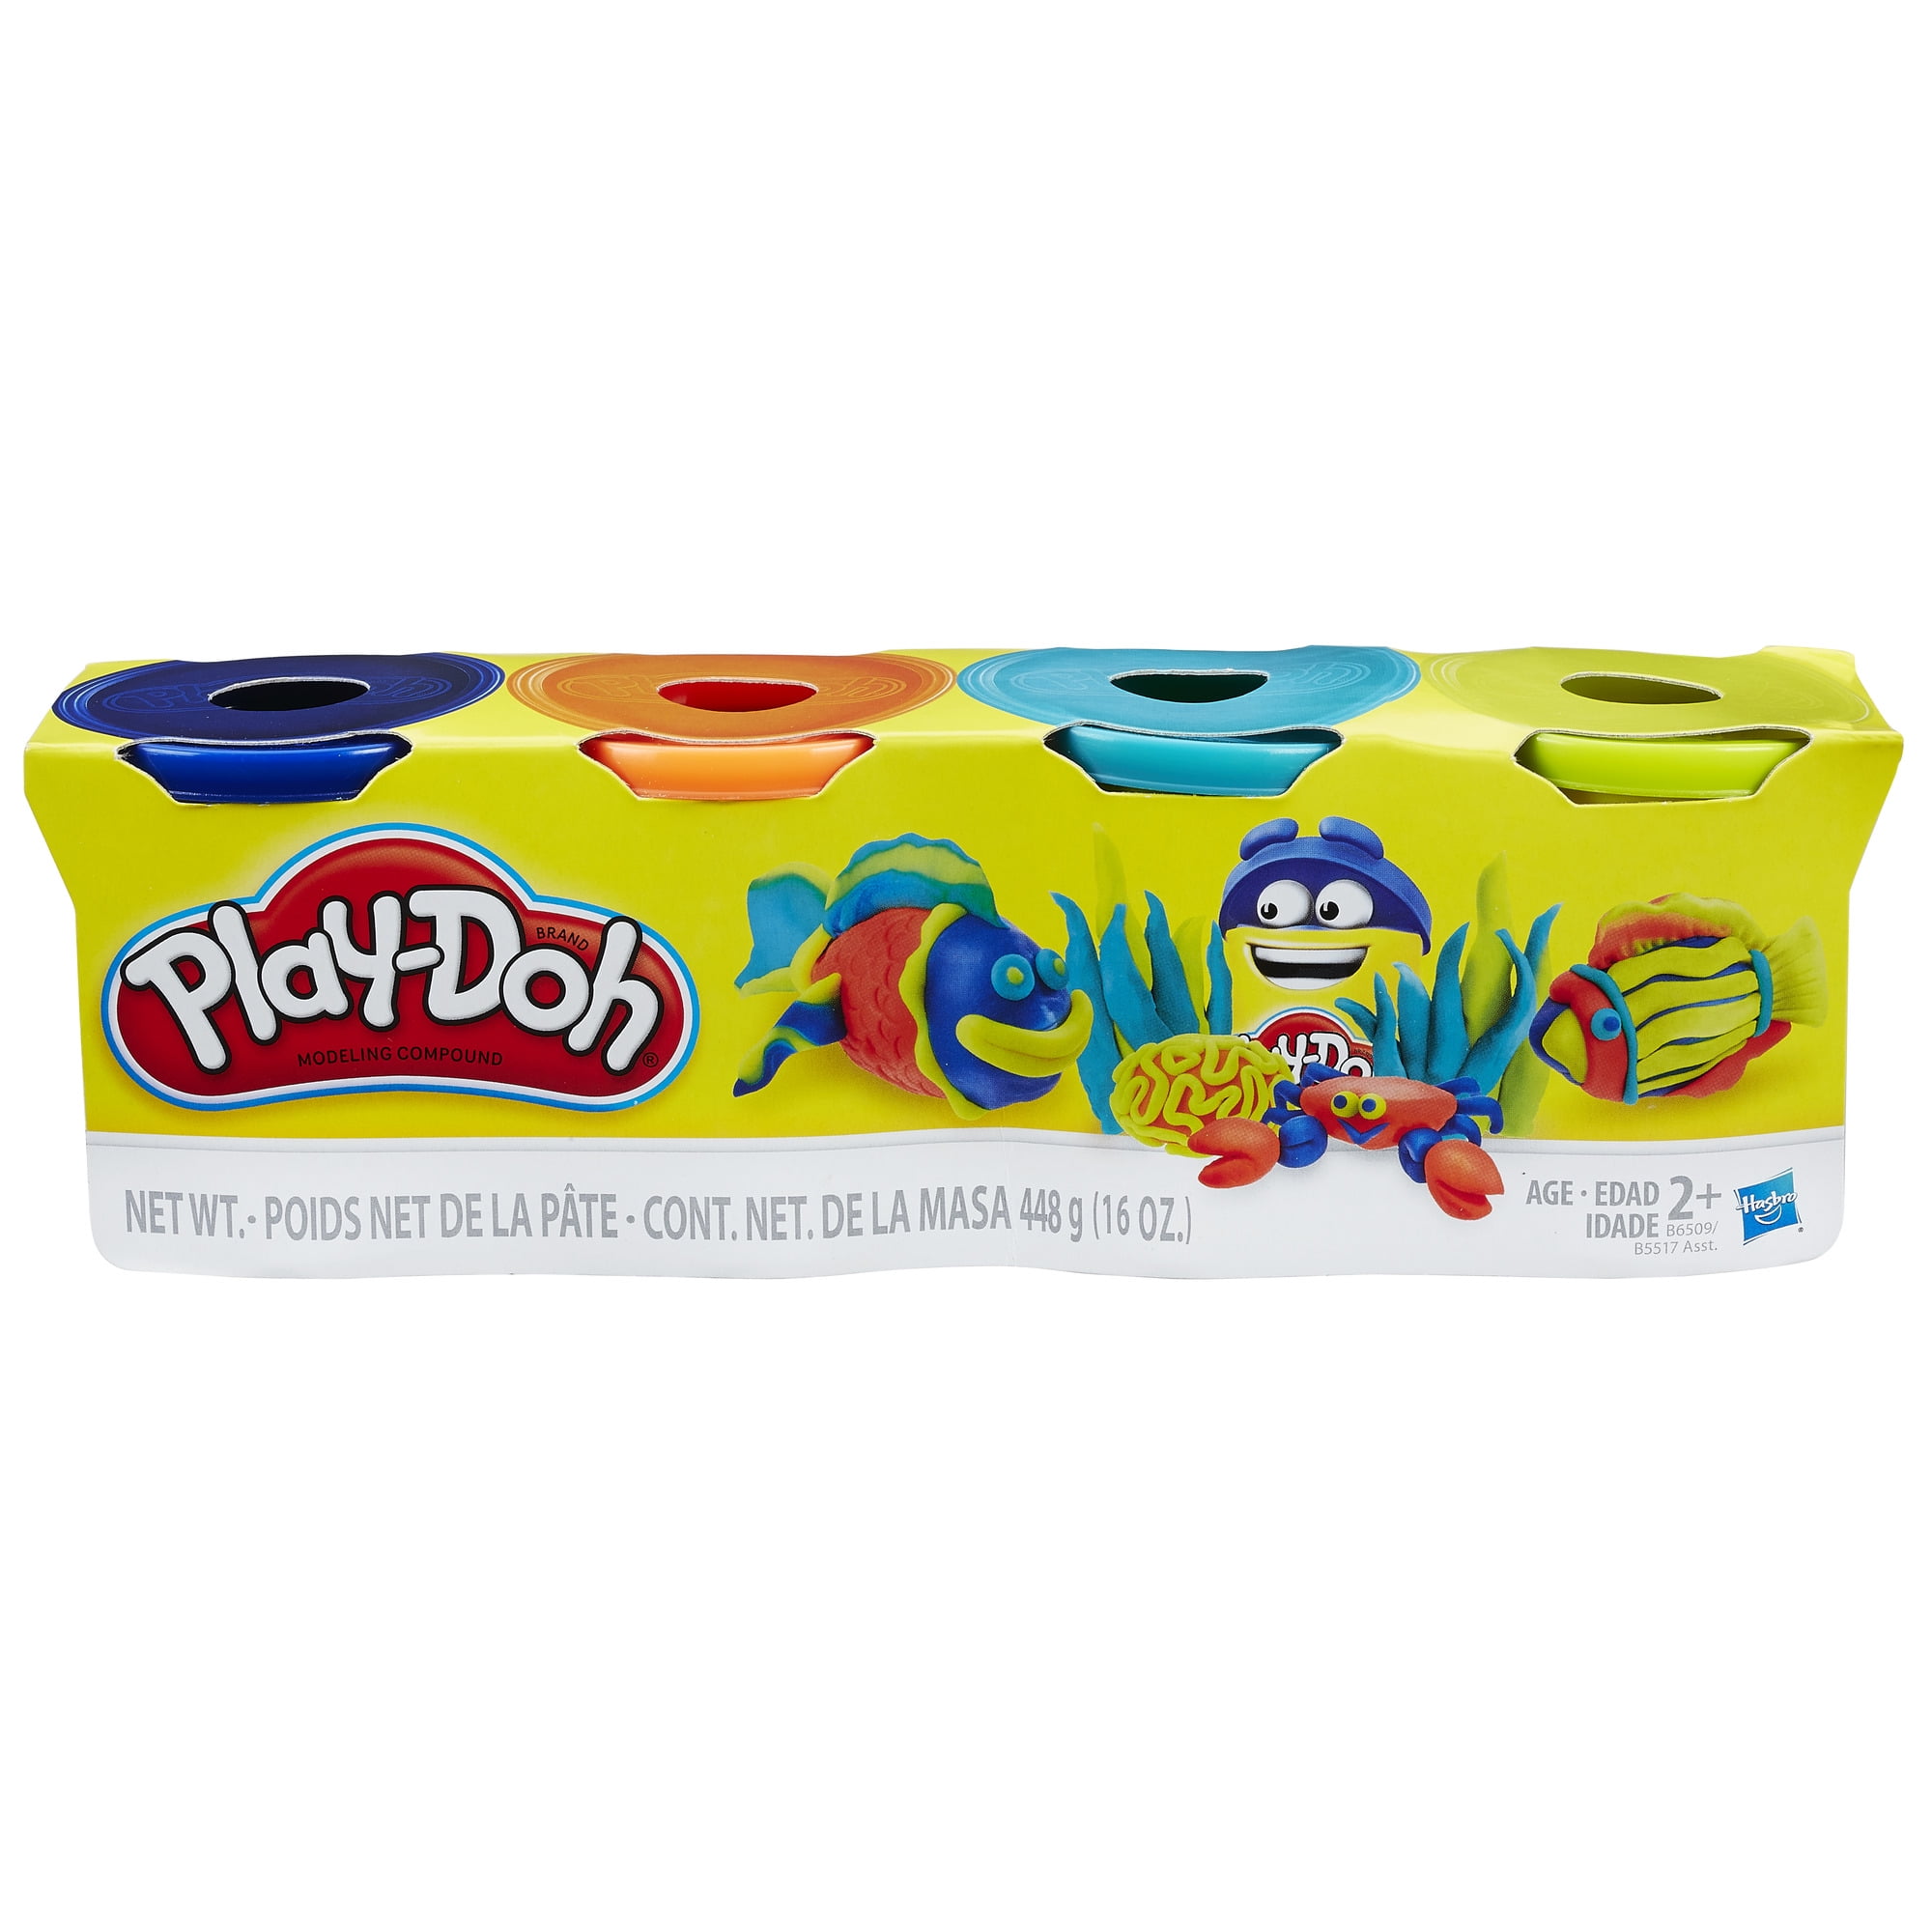 Play-Doh 4 Pack of Bright Colors Blue orange, Teal & Lime, 16 oz 